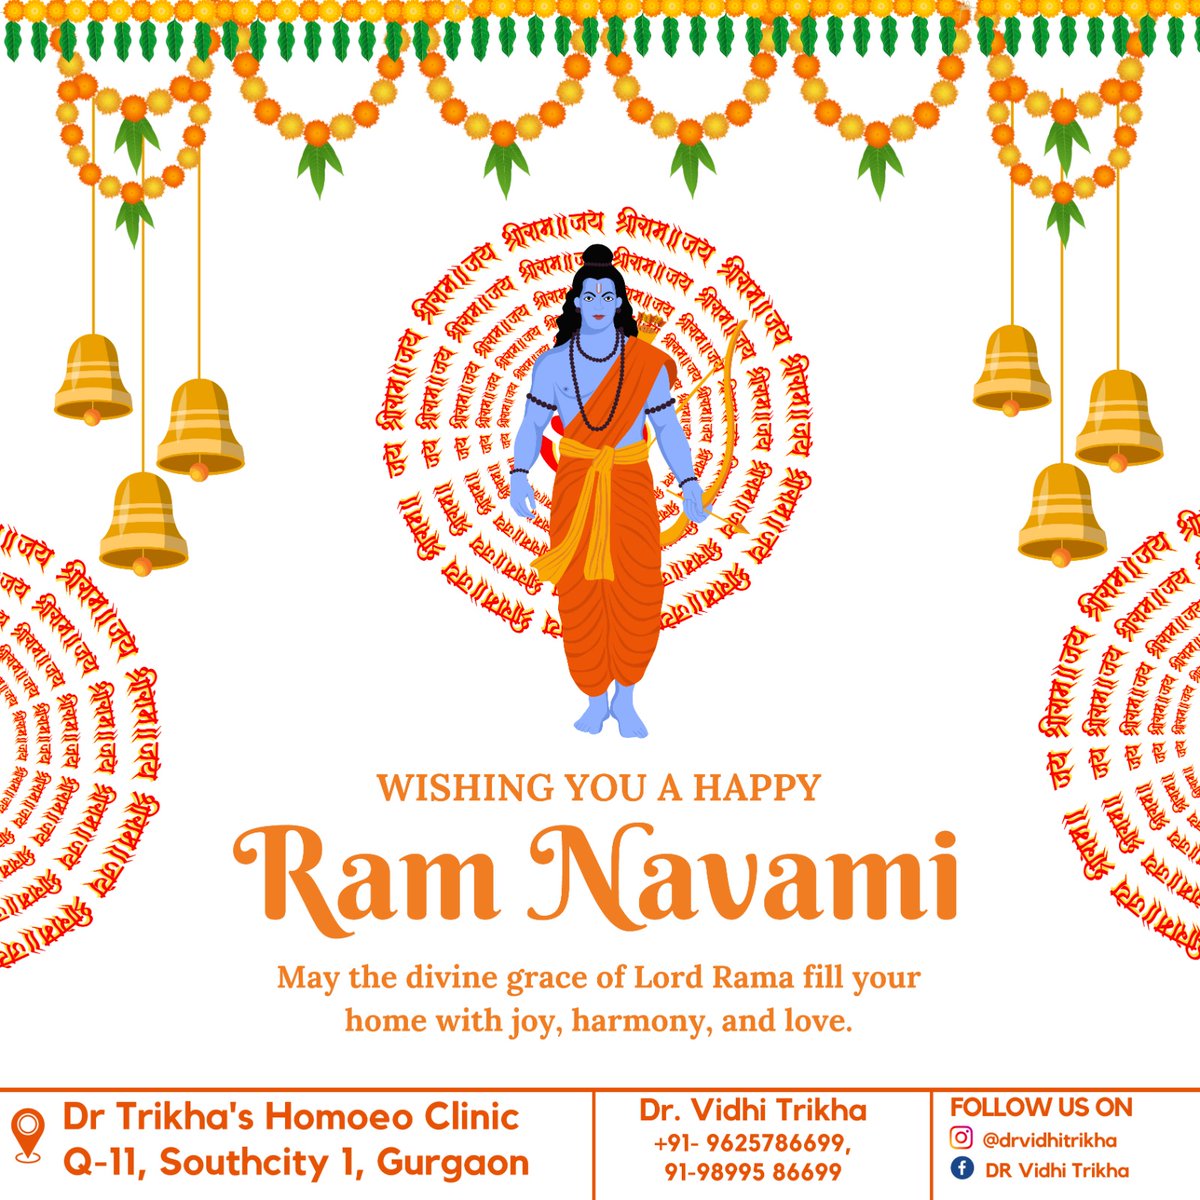 Wishing you all a Happy Ram Navami. May the blessings of Lord Rama bring peace and harmony to your home and heart.